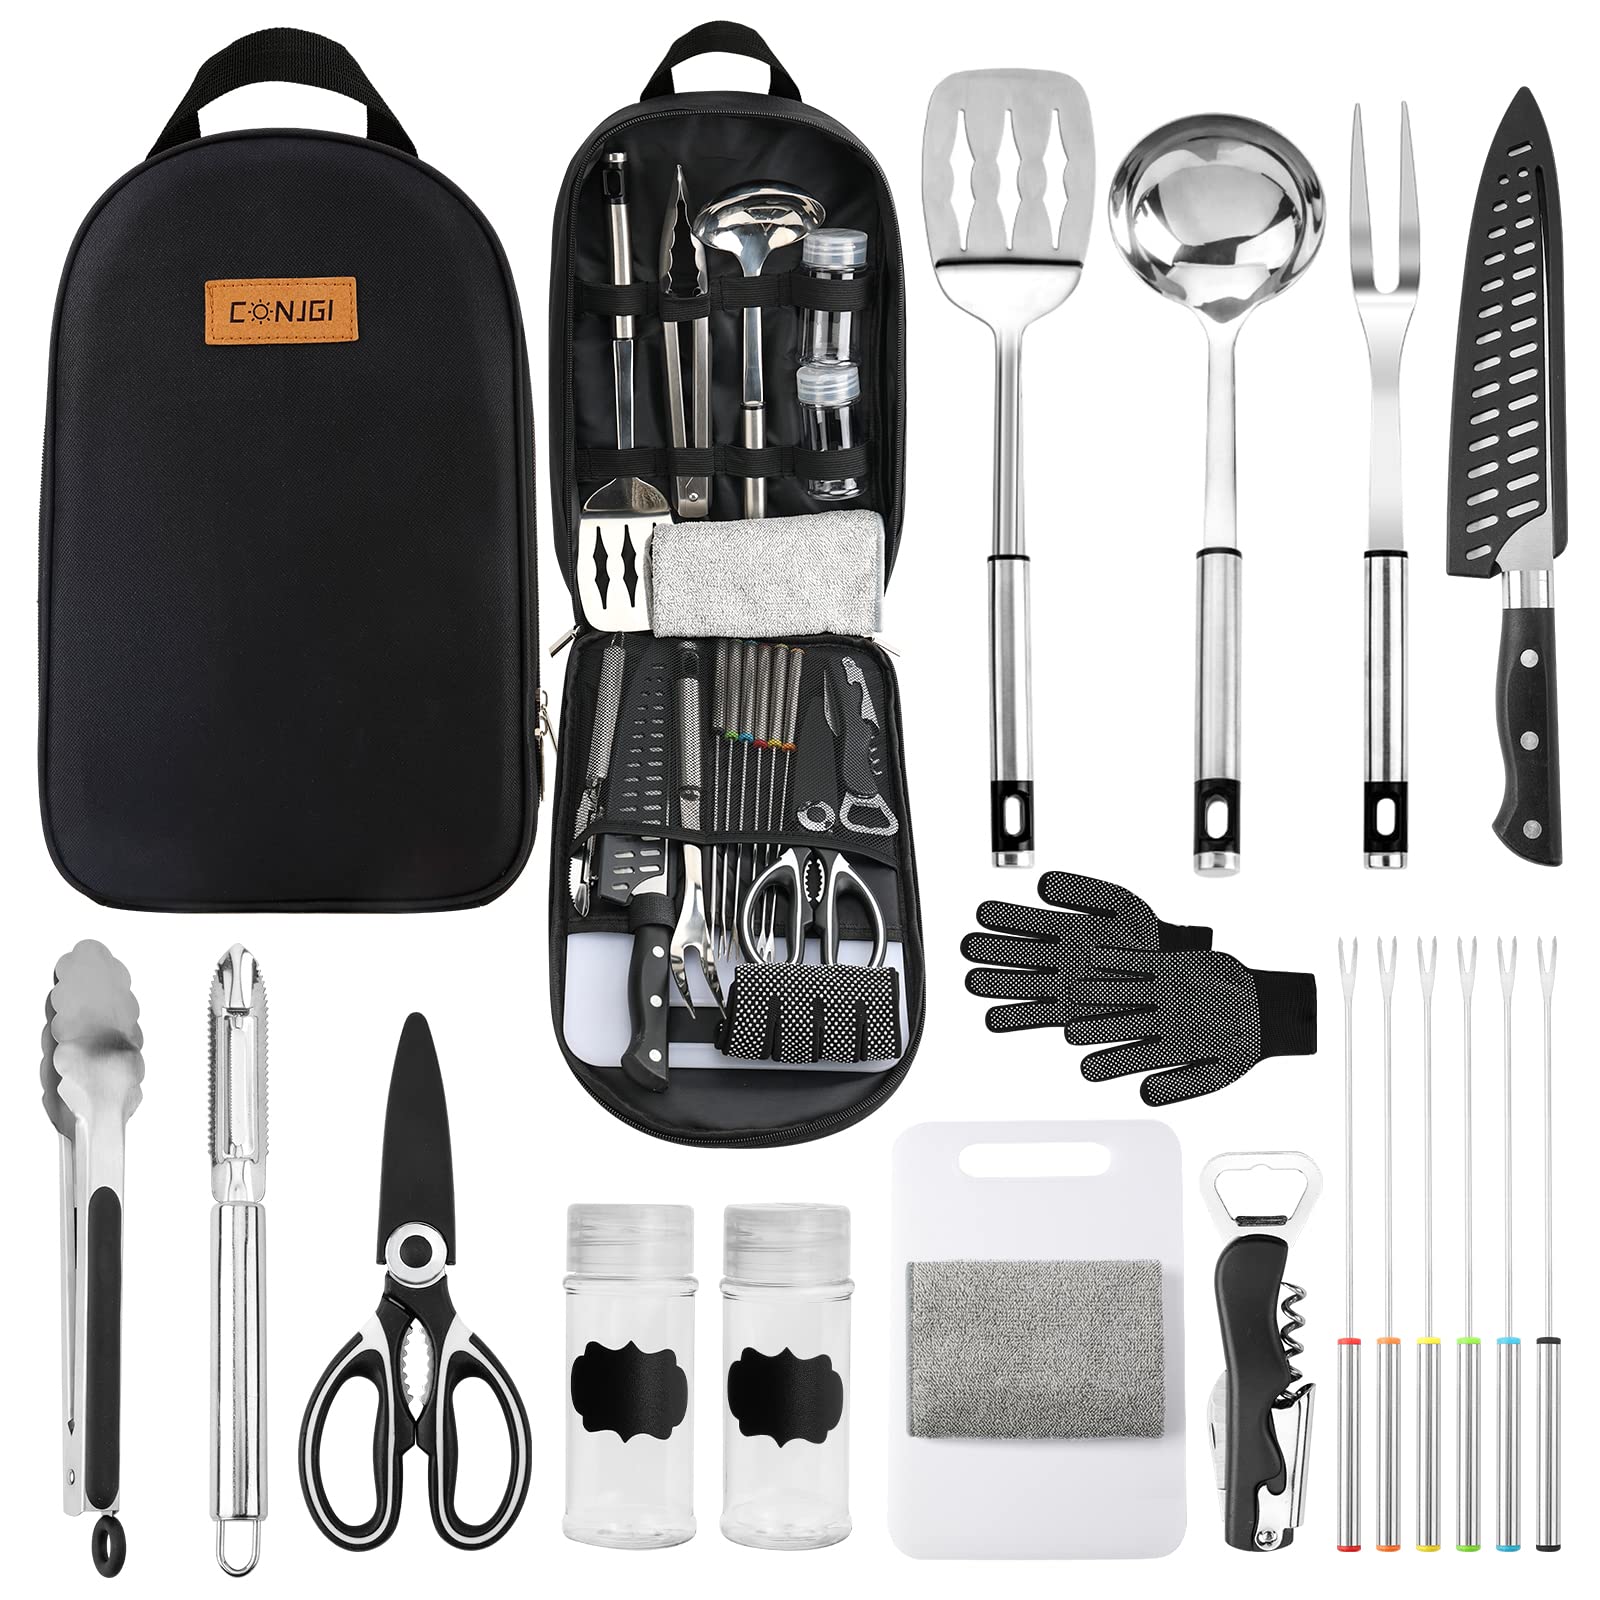 I LOVE PORTABLE STORE Camp Cooking Utensils | 11 Piece Camping Kitchen | RV  Cookware Kit | Travel Grill Set | BBQ Accessories & Essentials for Camper